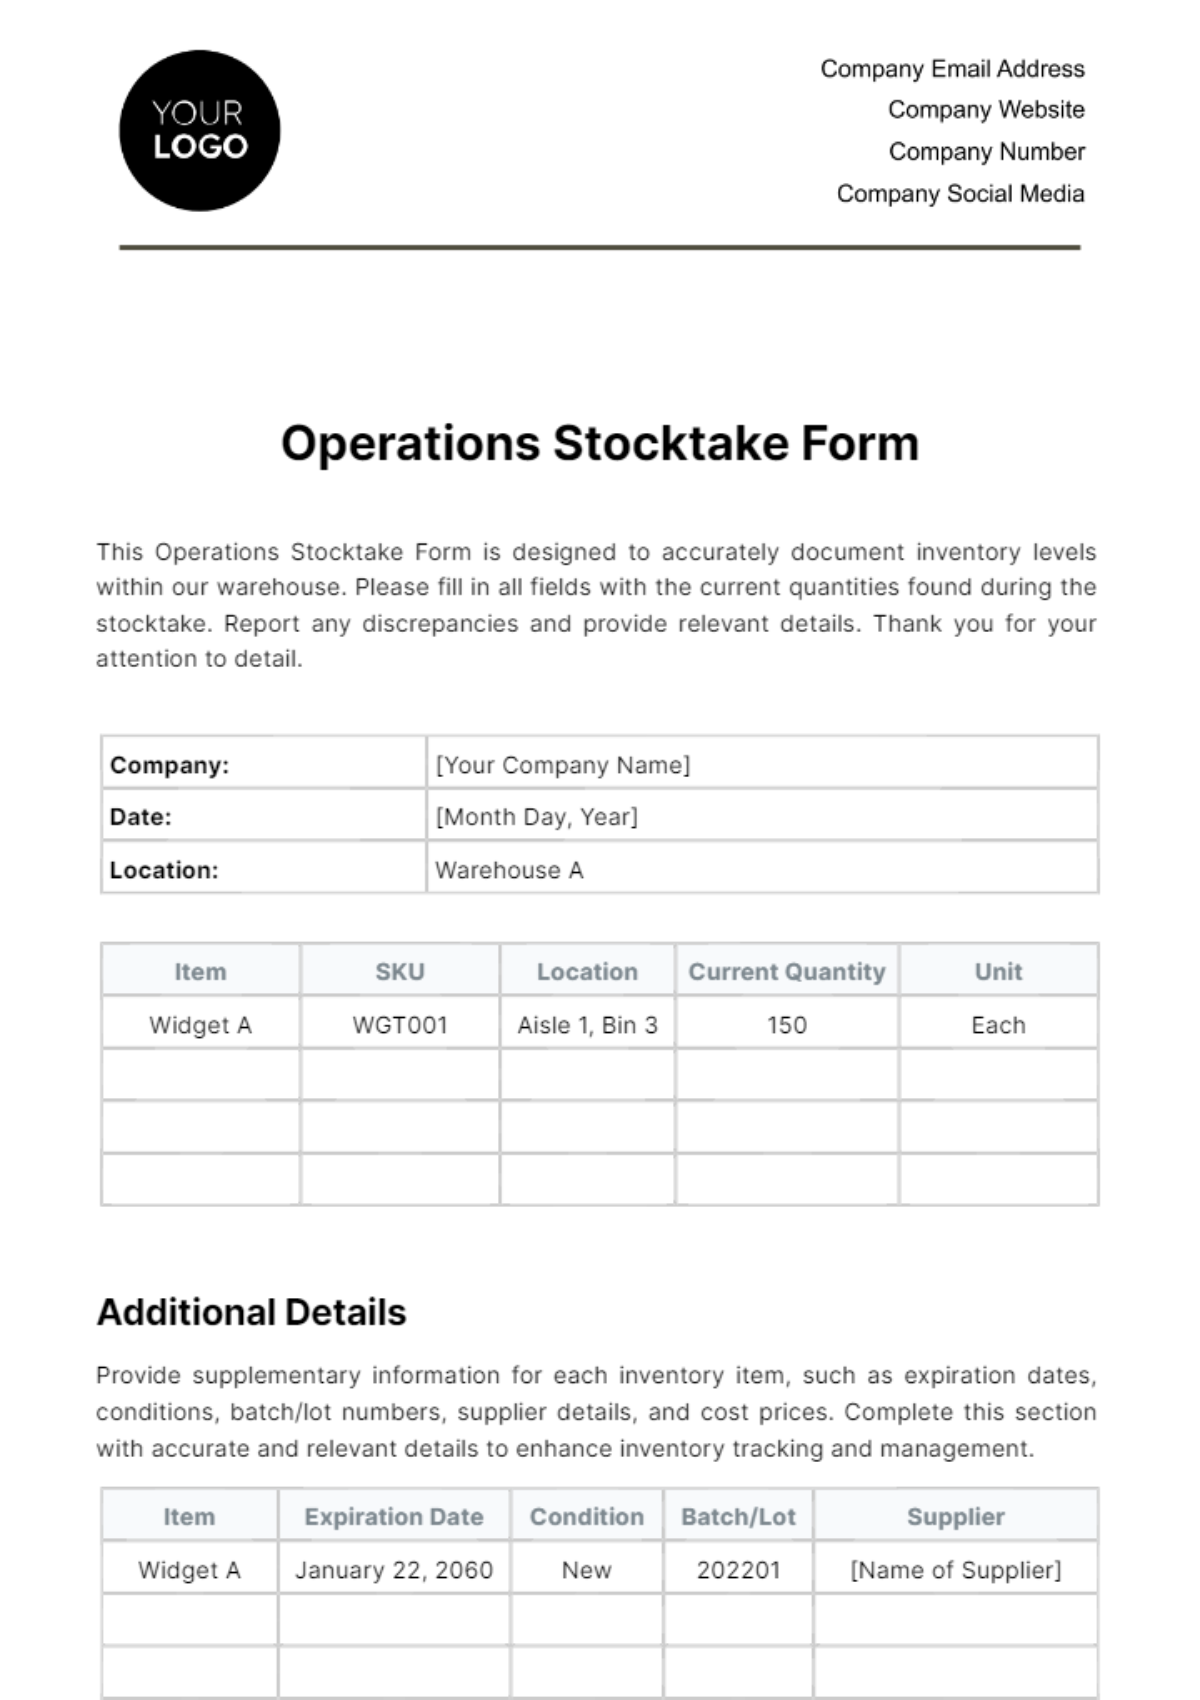 Operations Stocktake Form Template